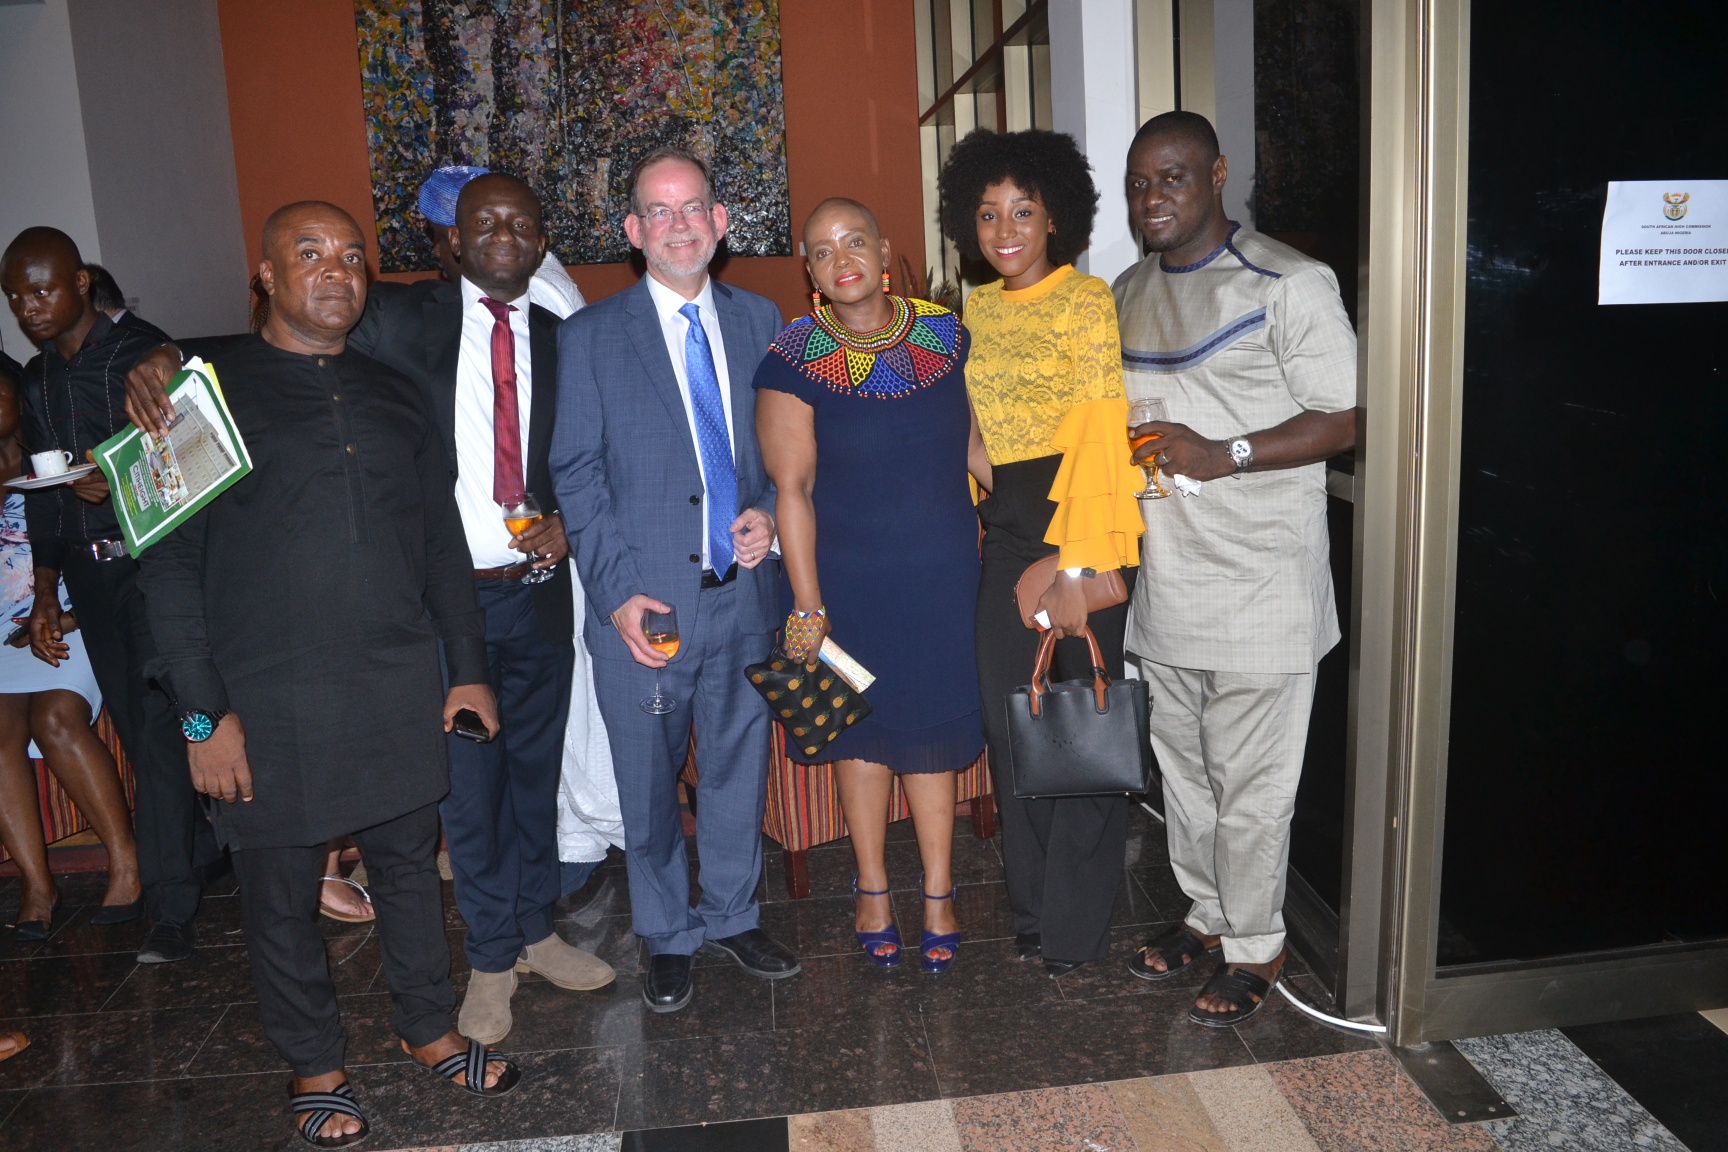 ACCLAIM NIGERIA CELEBRATES WITH SOUTH AFRICAN HIGH COMMISSION,NIGERIA.DURING 2019 NATIONA DAY ABUJA